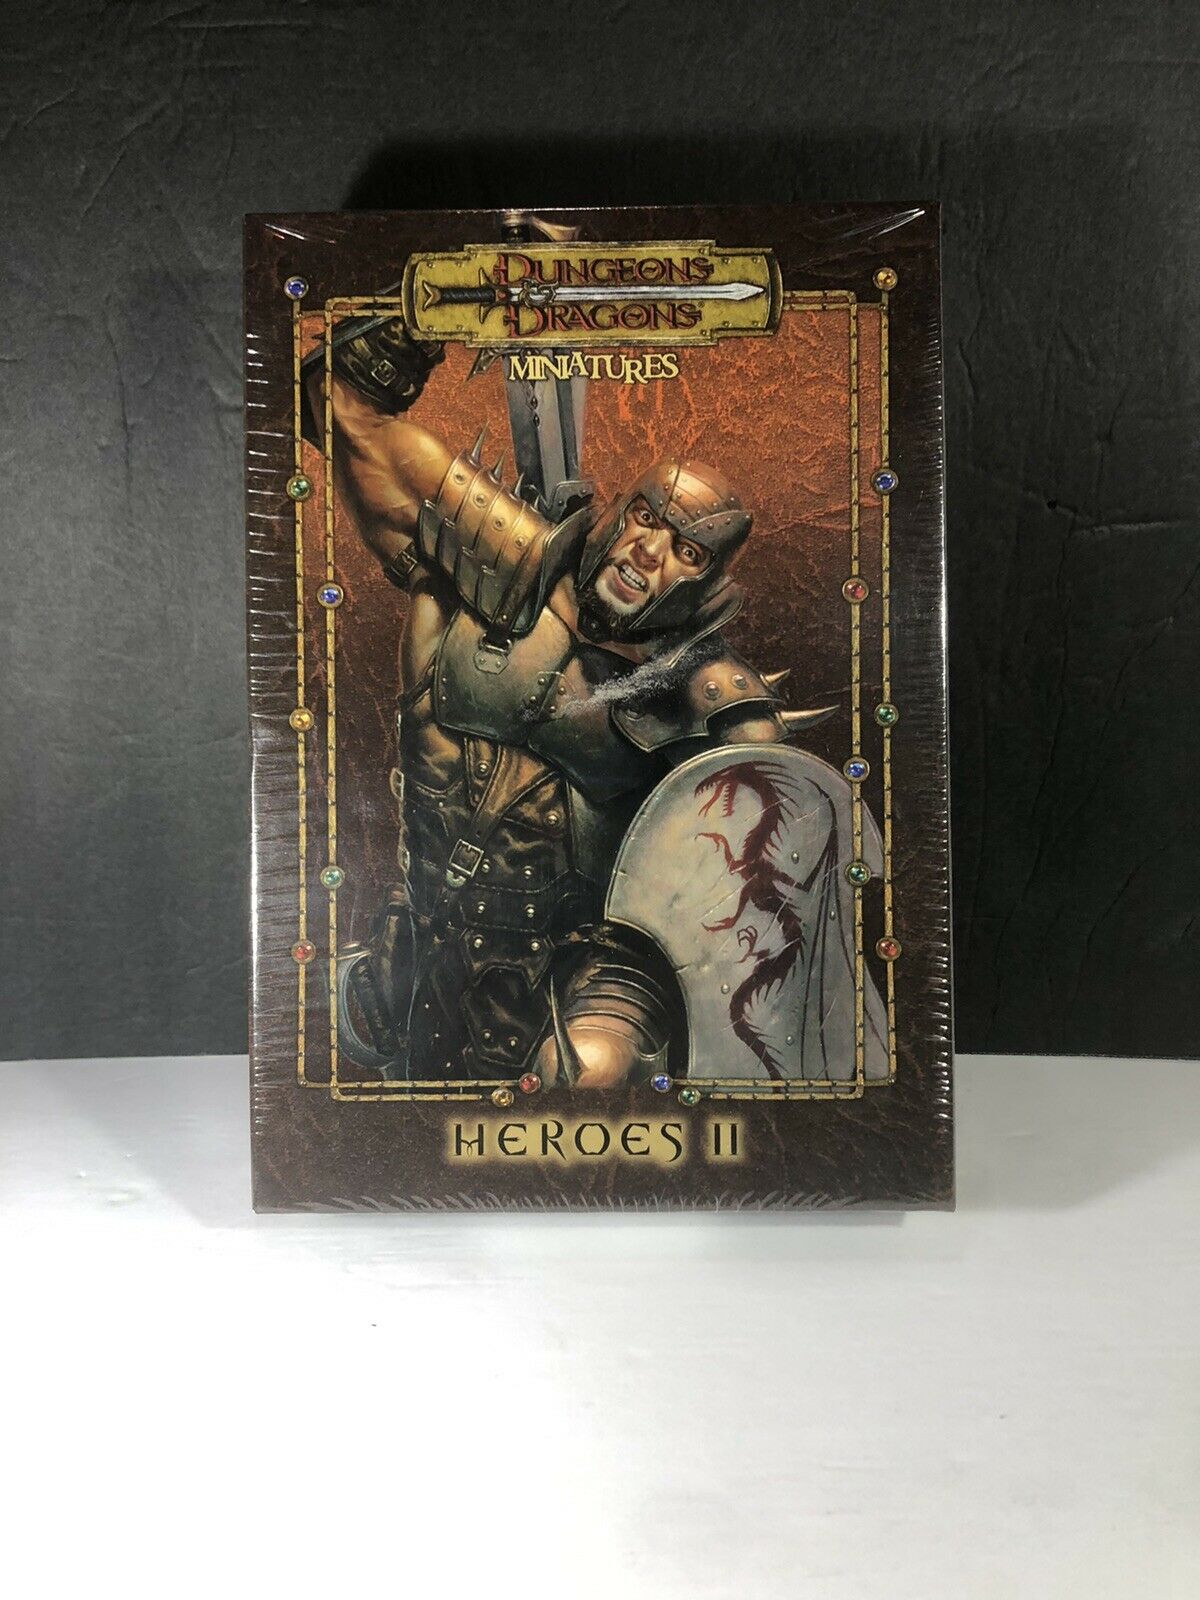 DUNGEONS AND DRAGONS Miniatures Chainmail box set HEROES II 2 2002 NRFP Mint